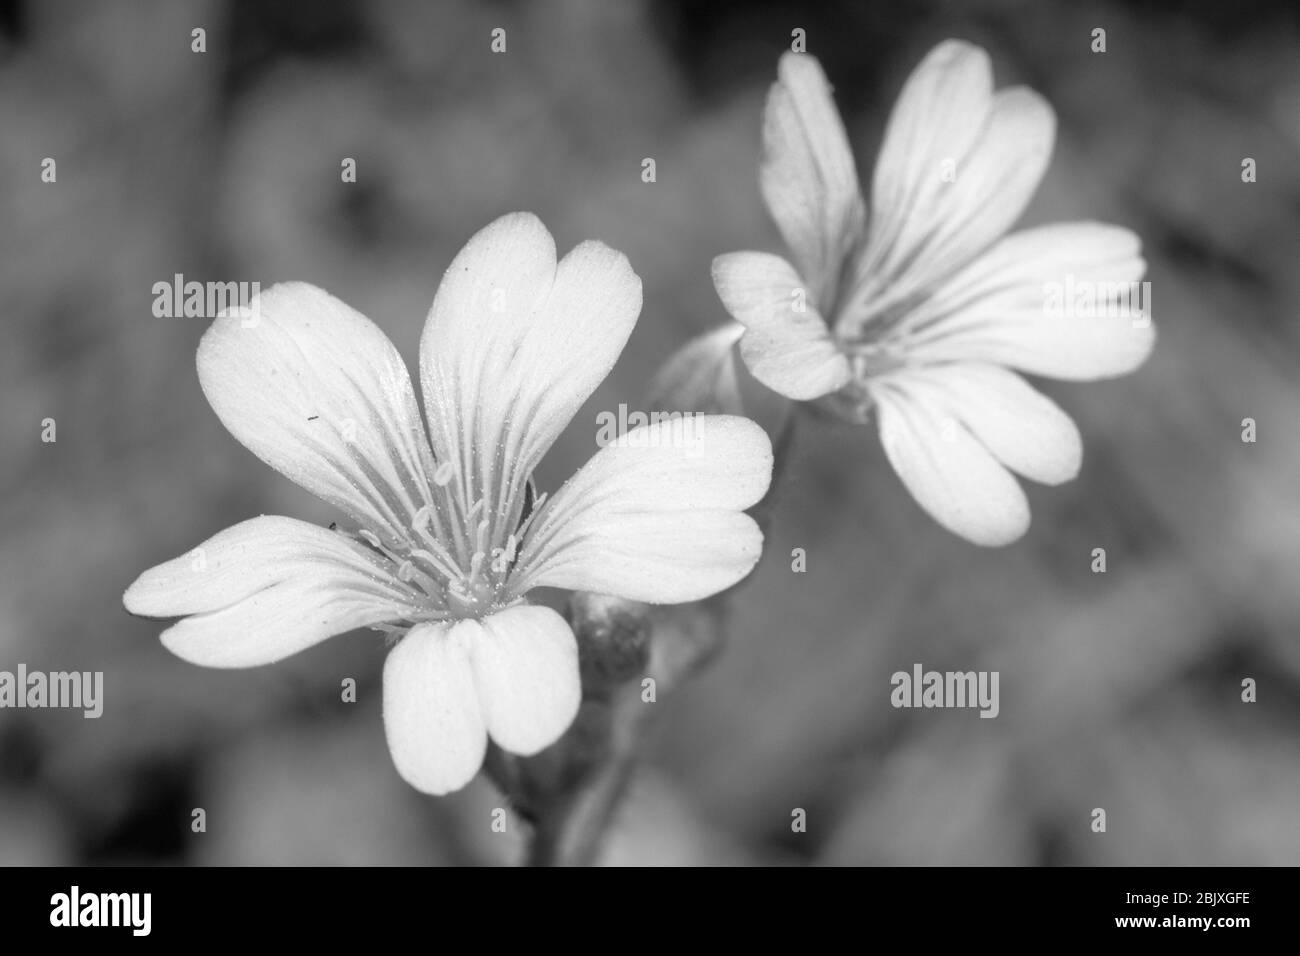 A black and white image of two small five-petal flowers growing in northern Arizona. Stock Photo